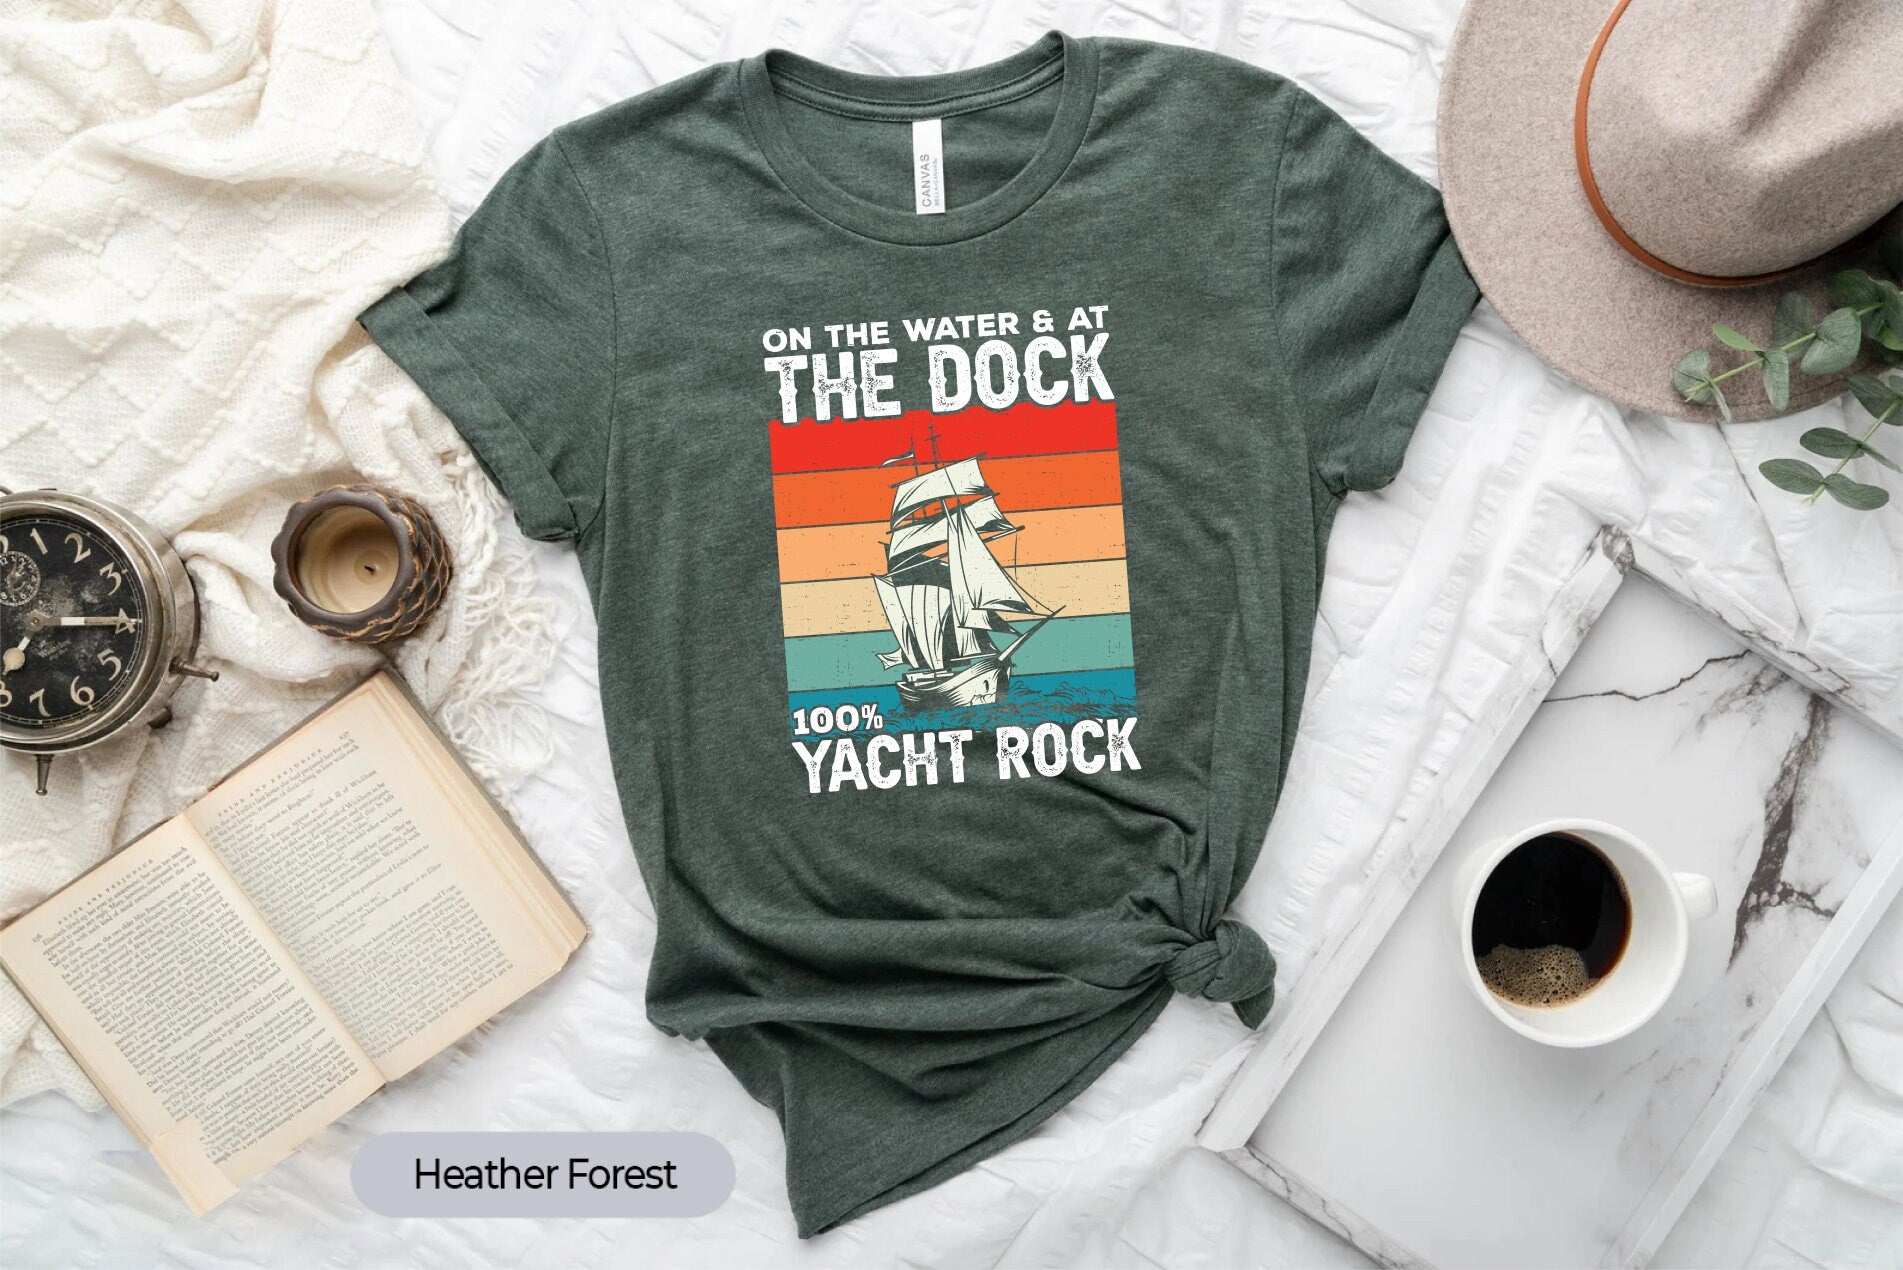 On The Water And At The Dock 100% Yacht Rock Shirt, Yacht Captain Shirt, Boat Lovers, Pontoon Boat Shirt